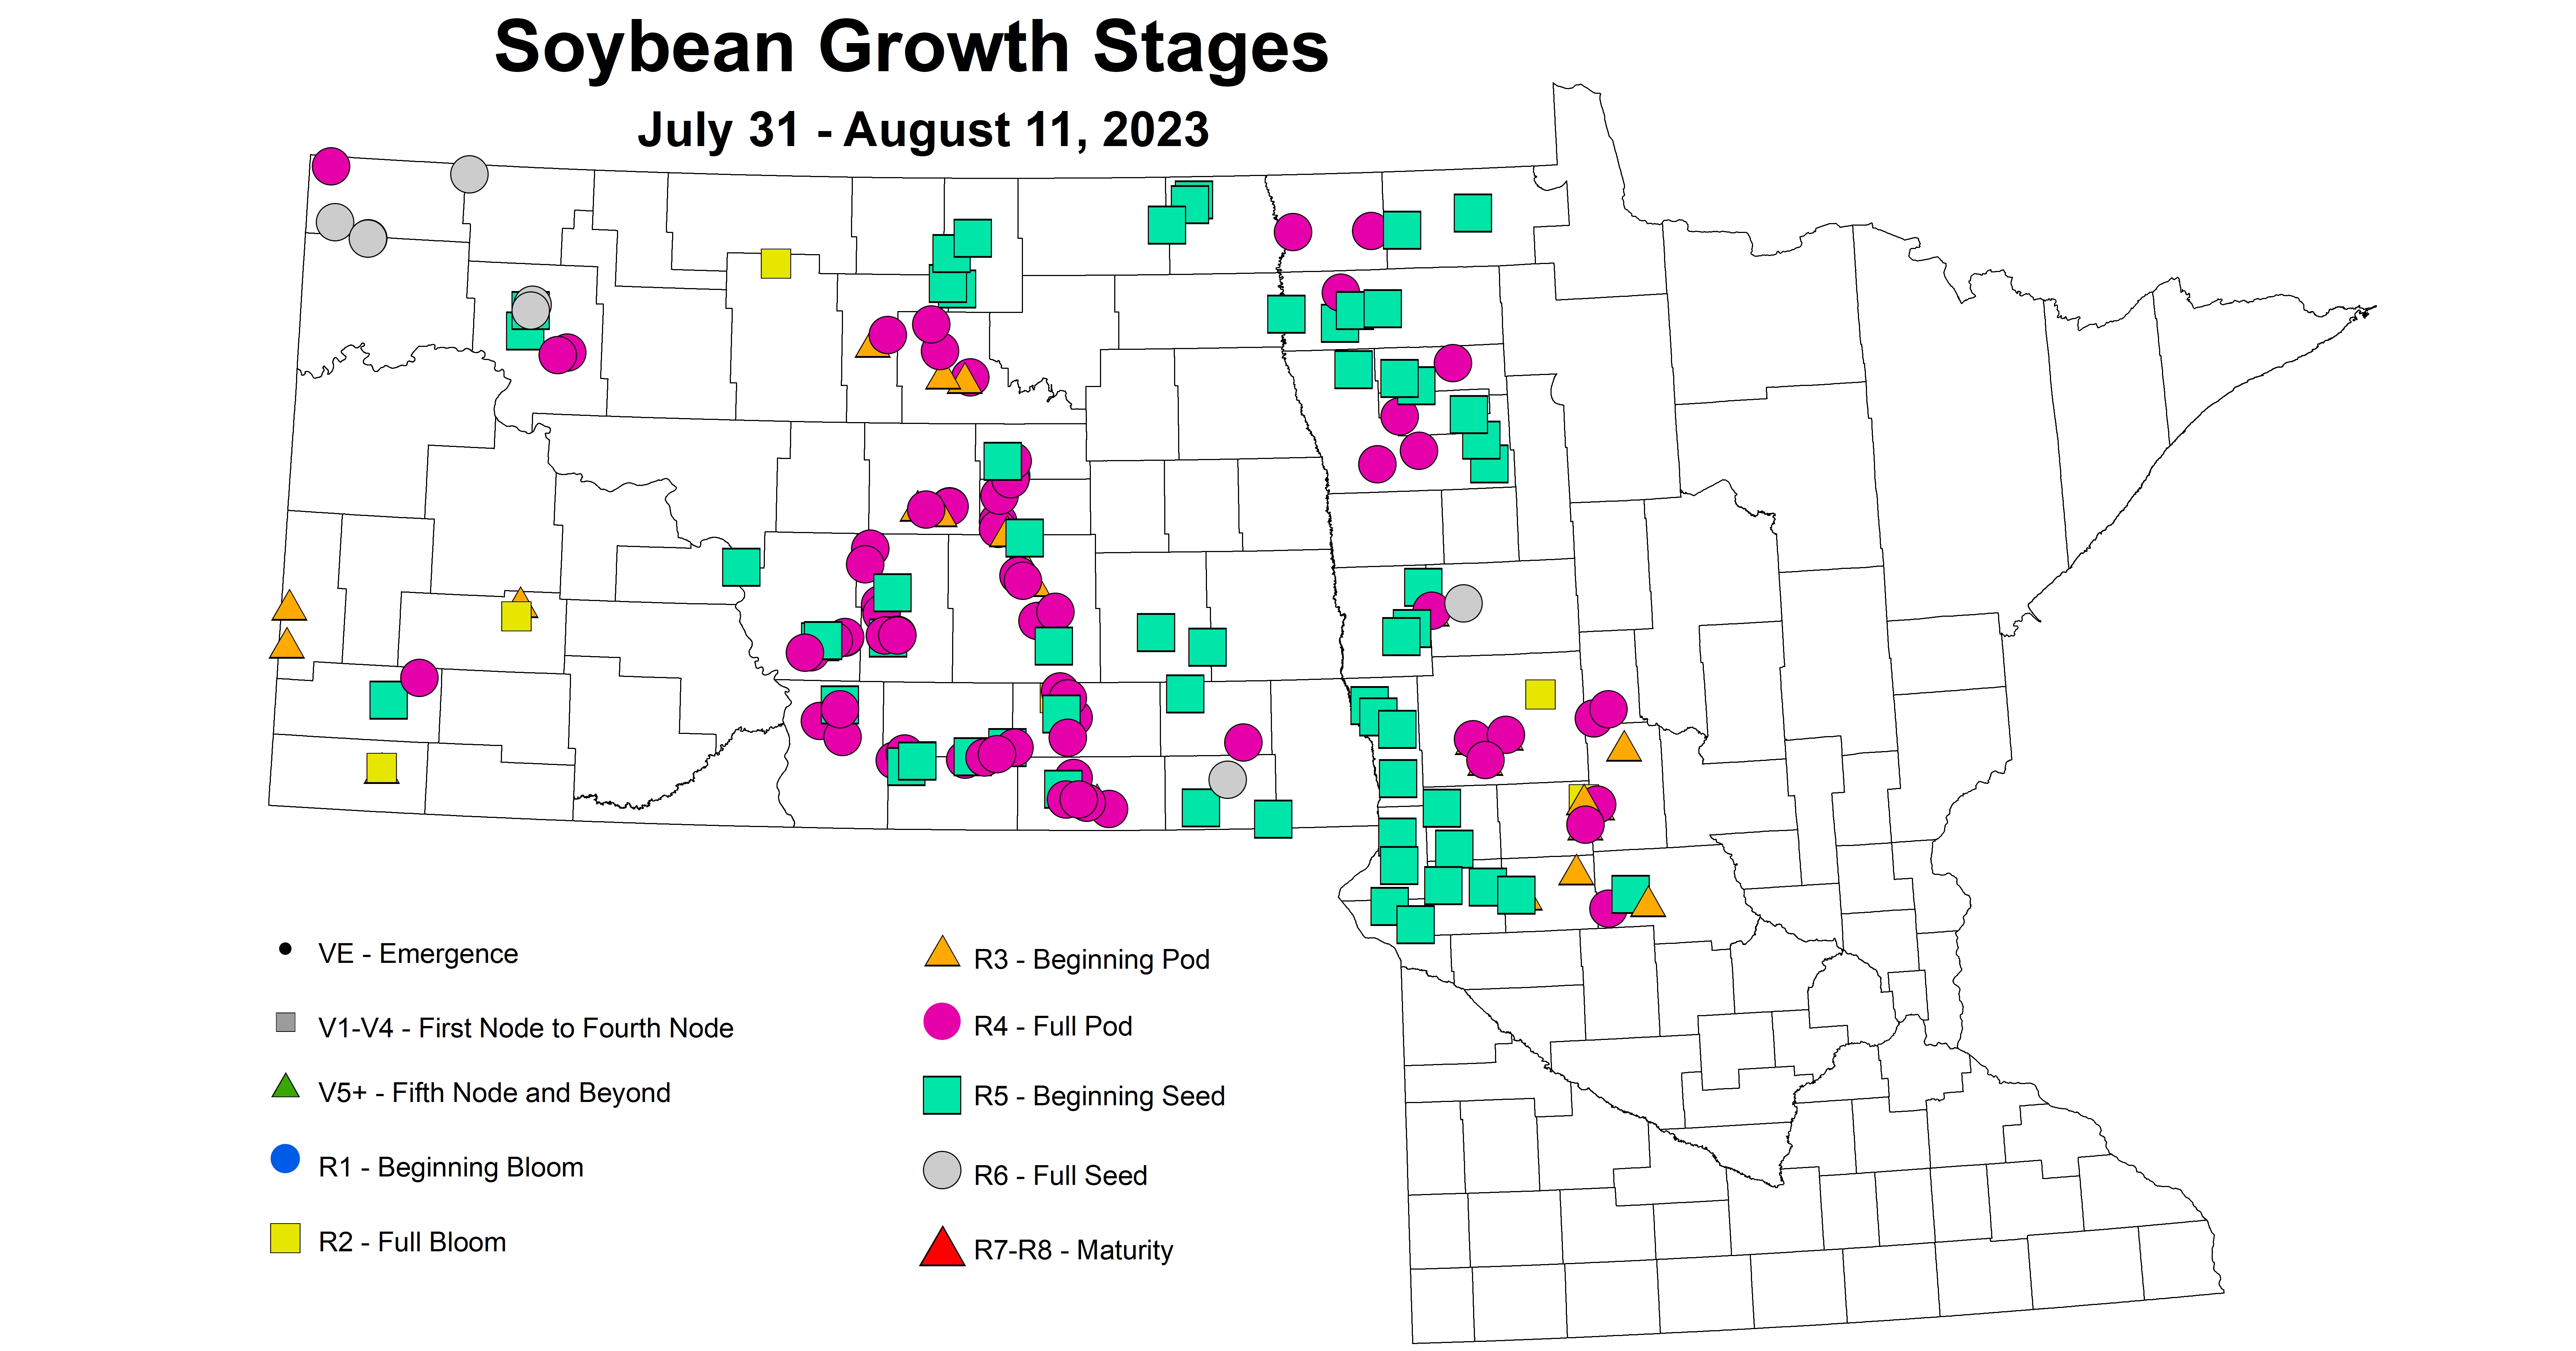 soybean growth stages 7.31-8.11 2023